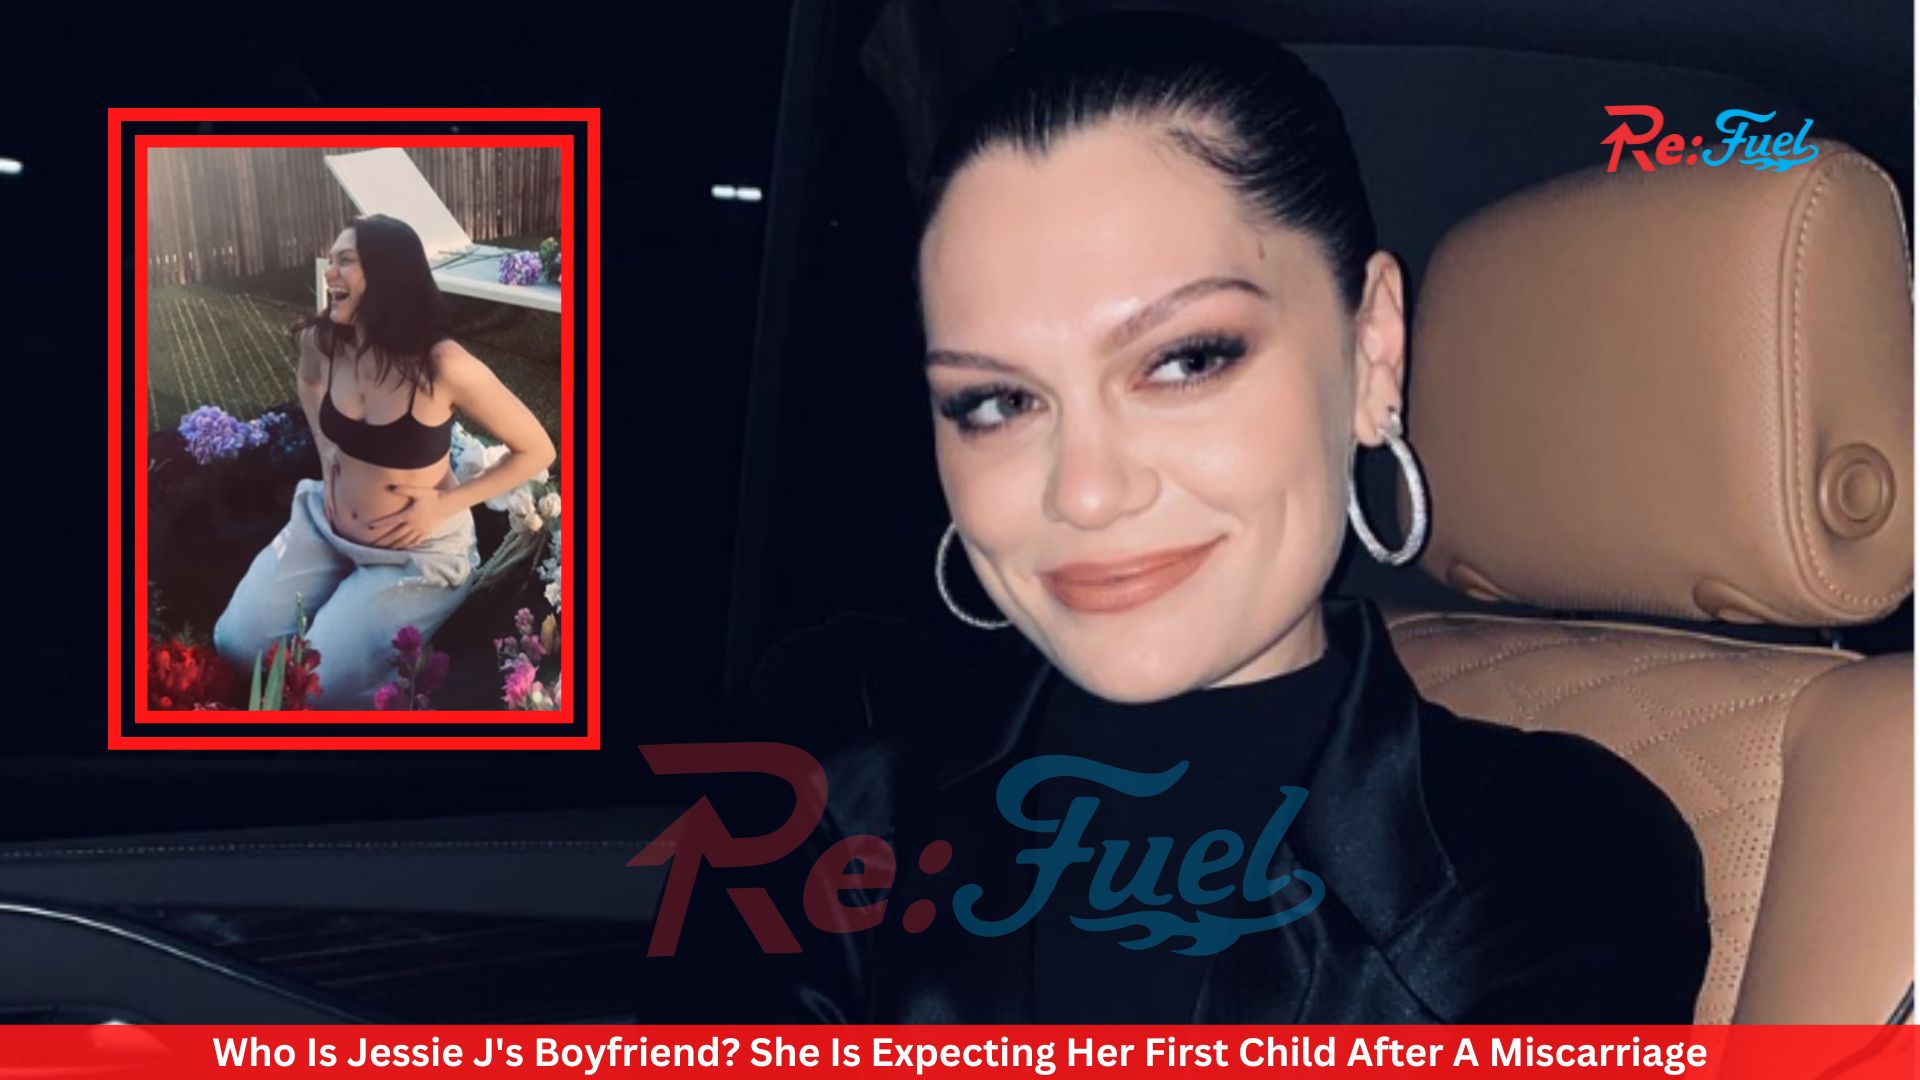 Who Is Jessie J's Boyfriend? She Is Expecting Her First Child After A Miscarriage